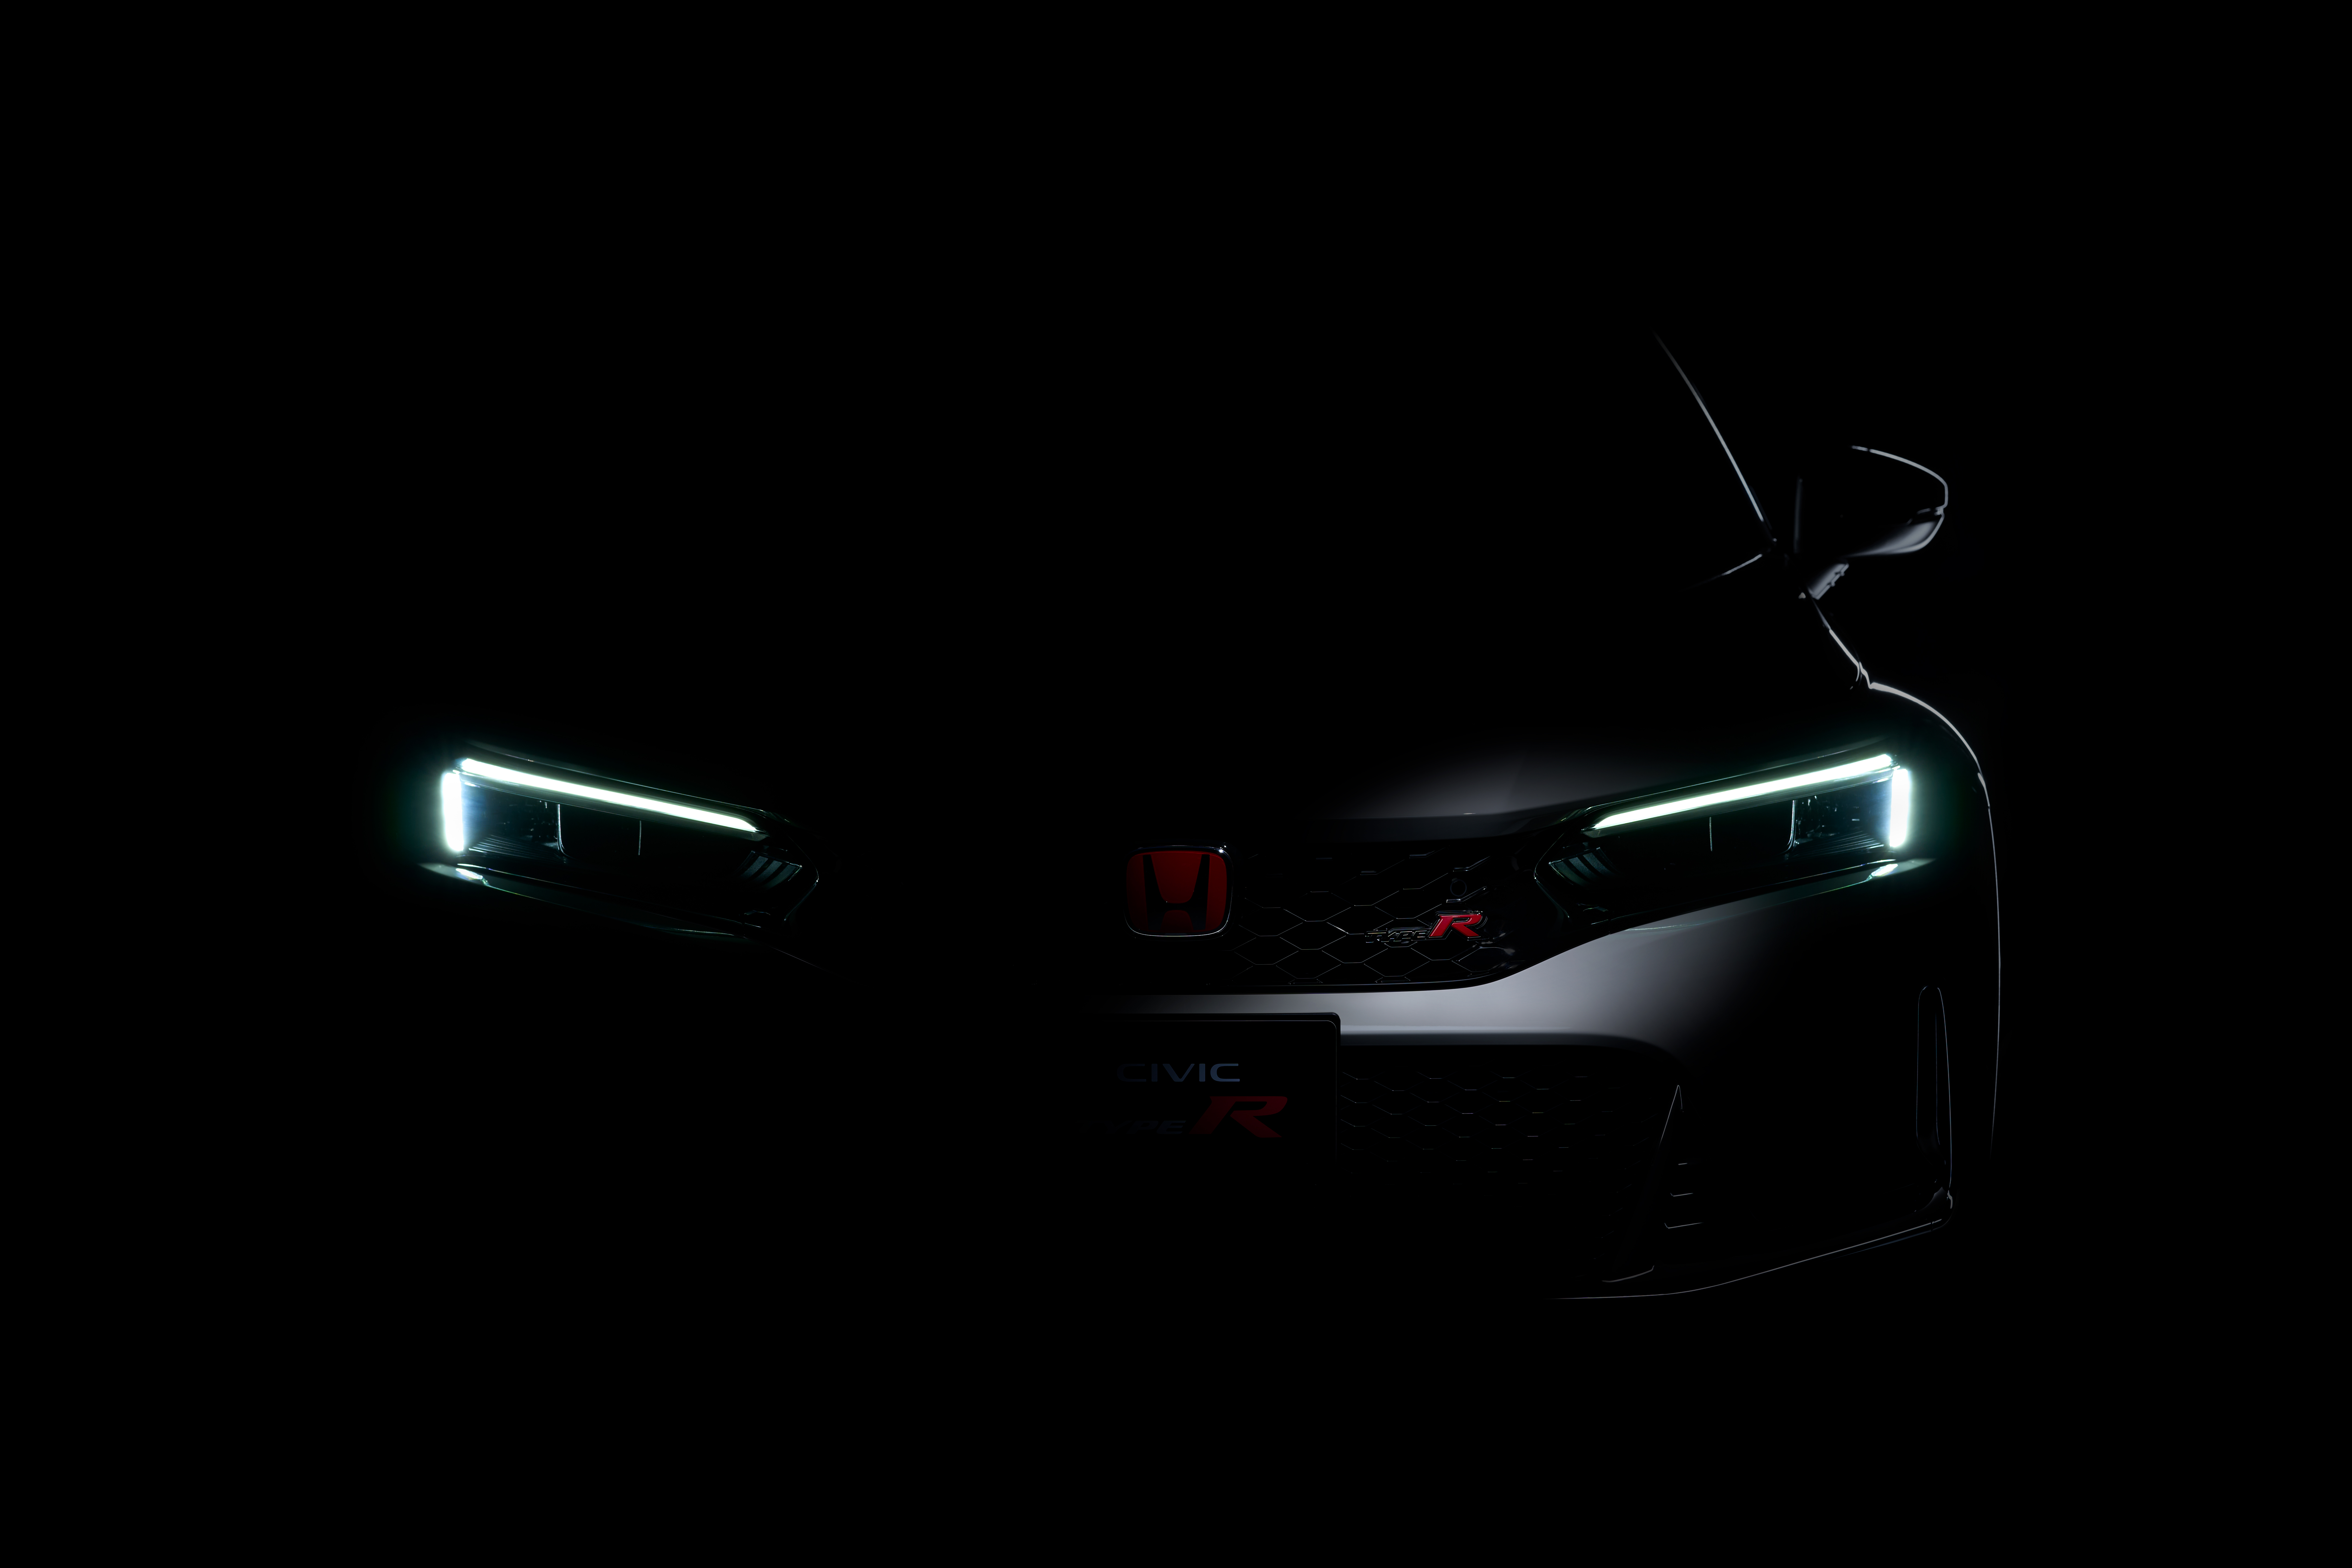 We’re One Week Away From Seeing the New Honda Civic Type R